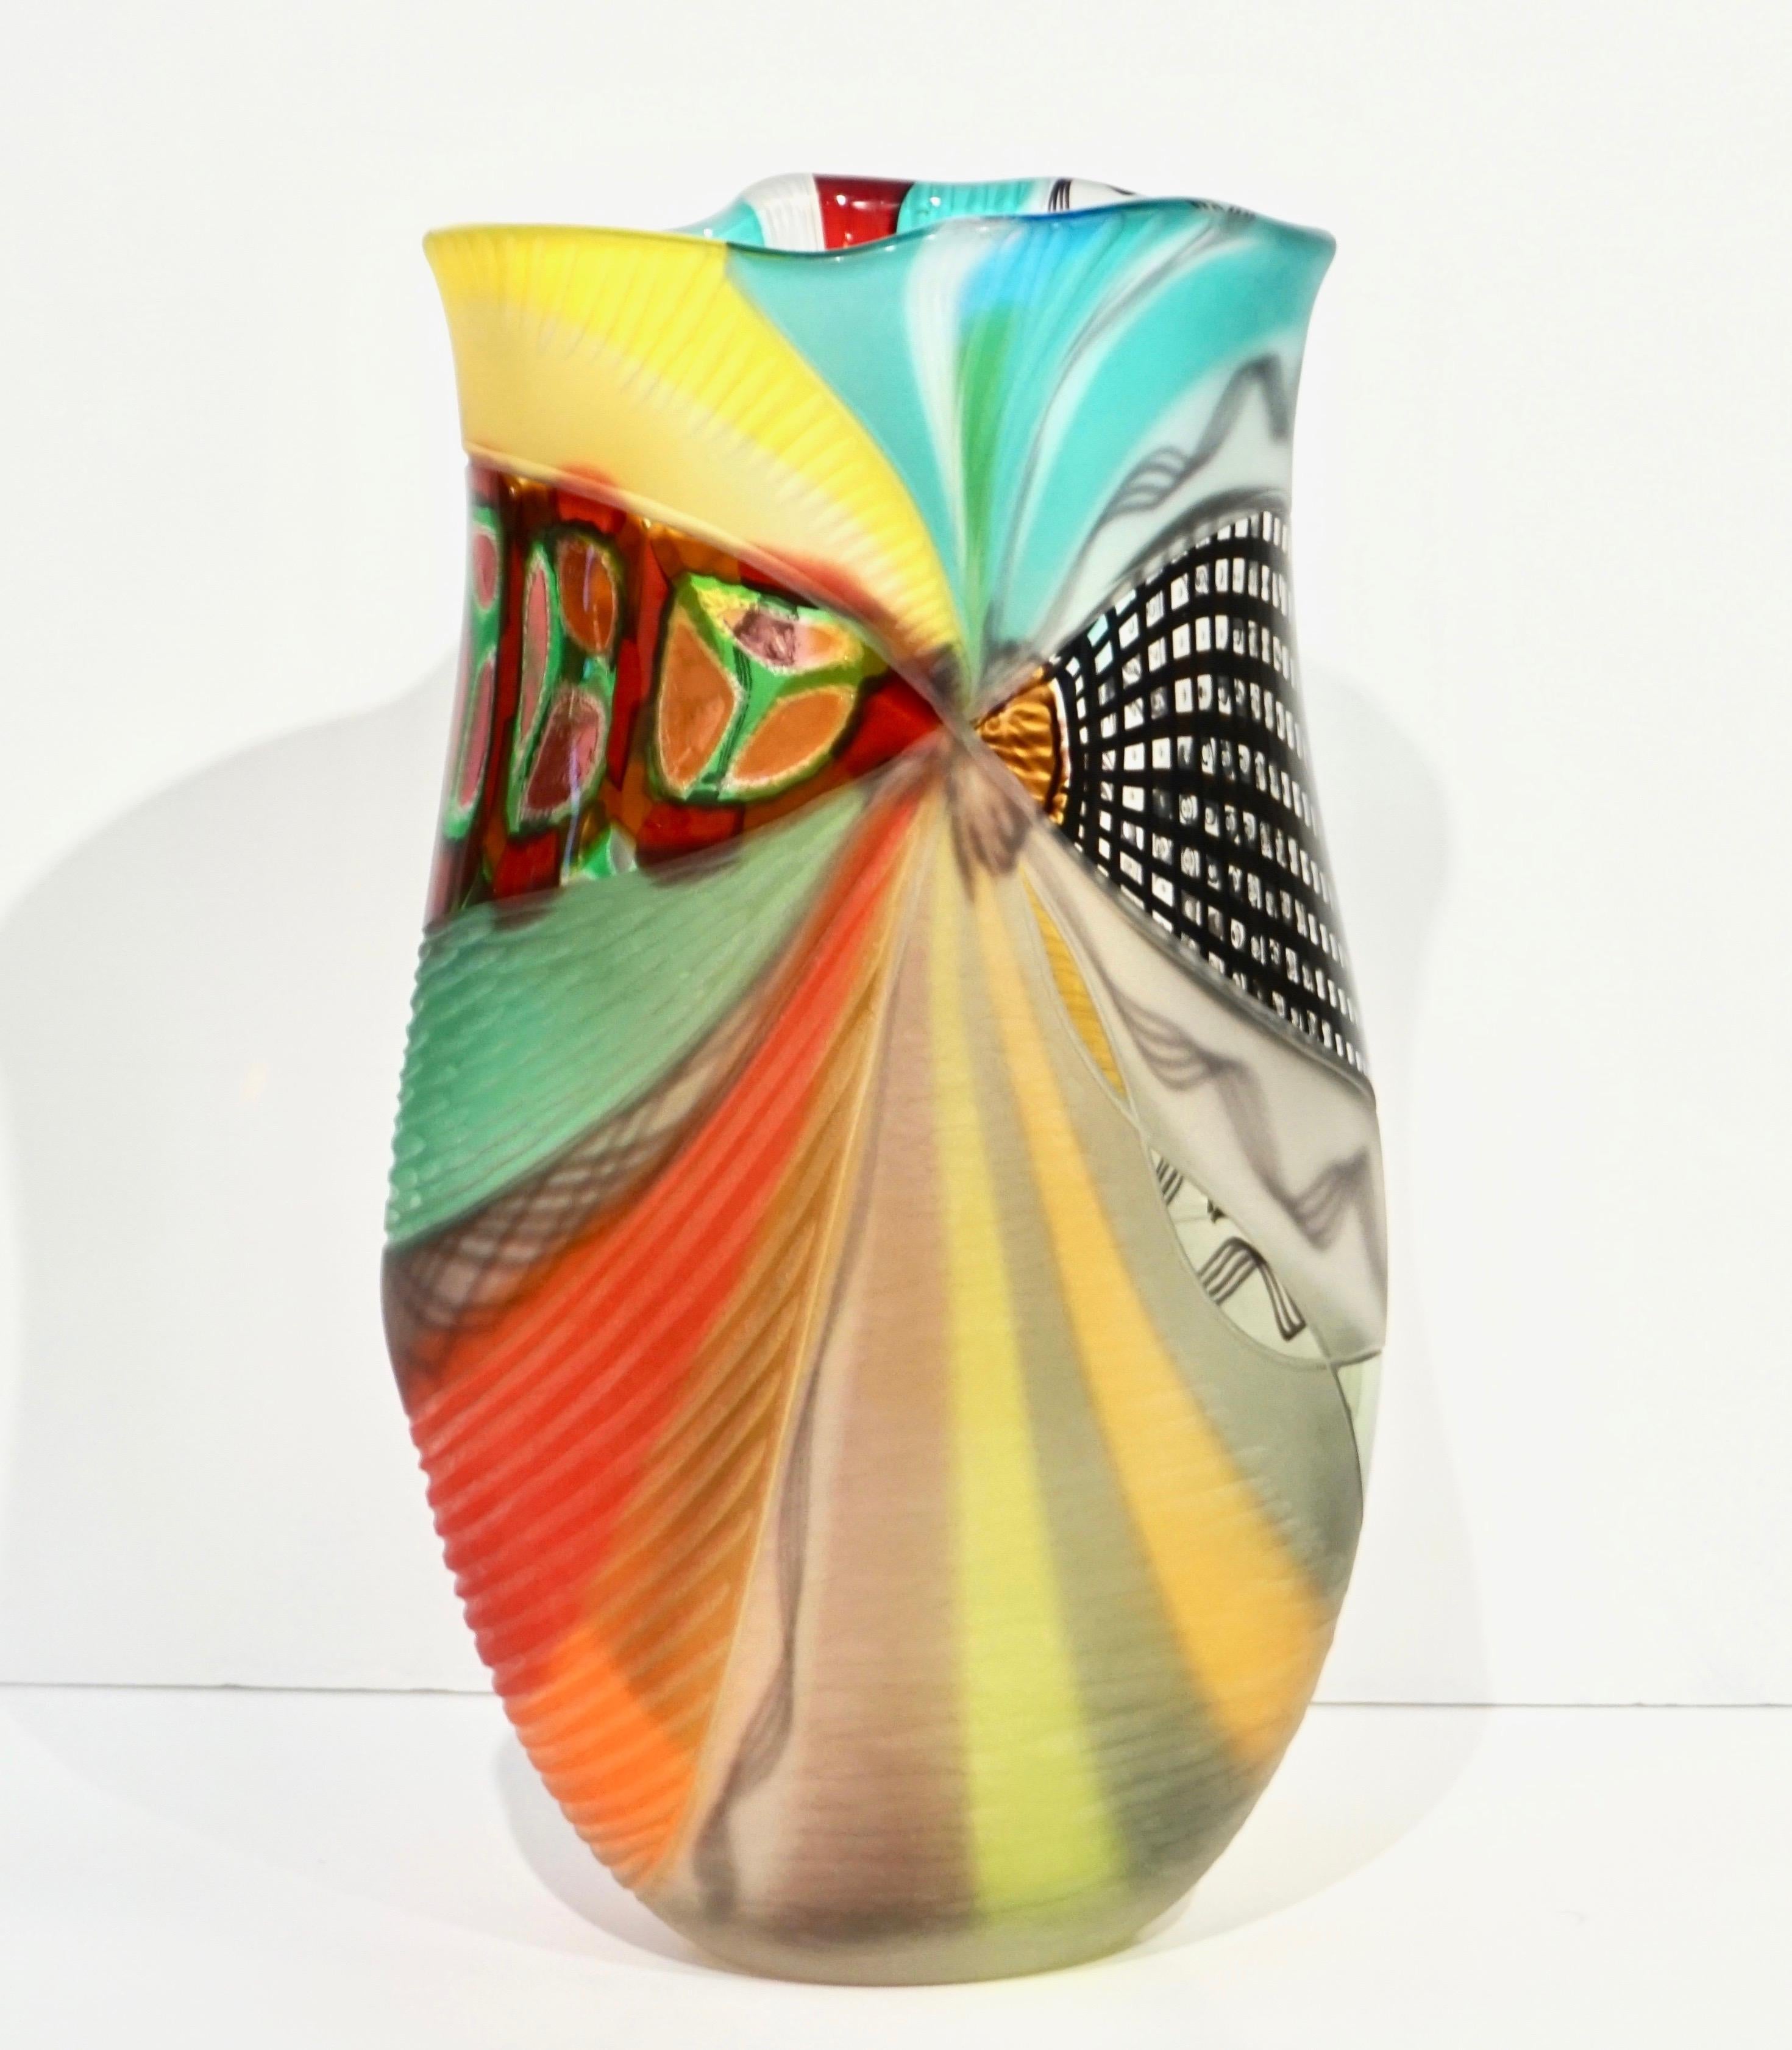 Early 2000s Murano glass vase, by Afro Celotto, worked as an abstract modern painting, with waved edge that adds movement, made precious by the use of several difficult techniques like avventurina, filigrana, reticello... in vibrant colors, red,